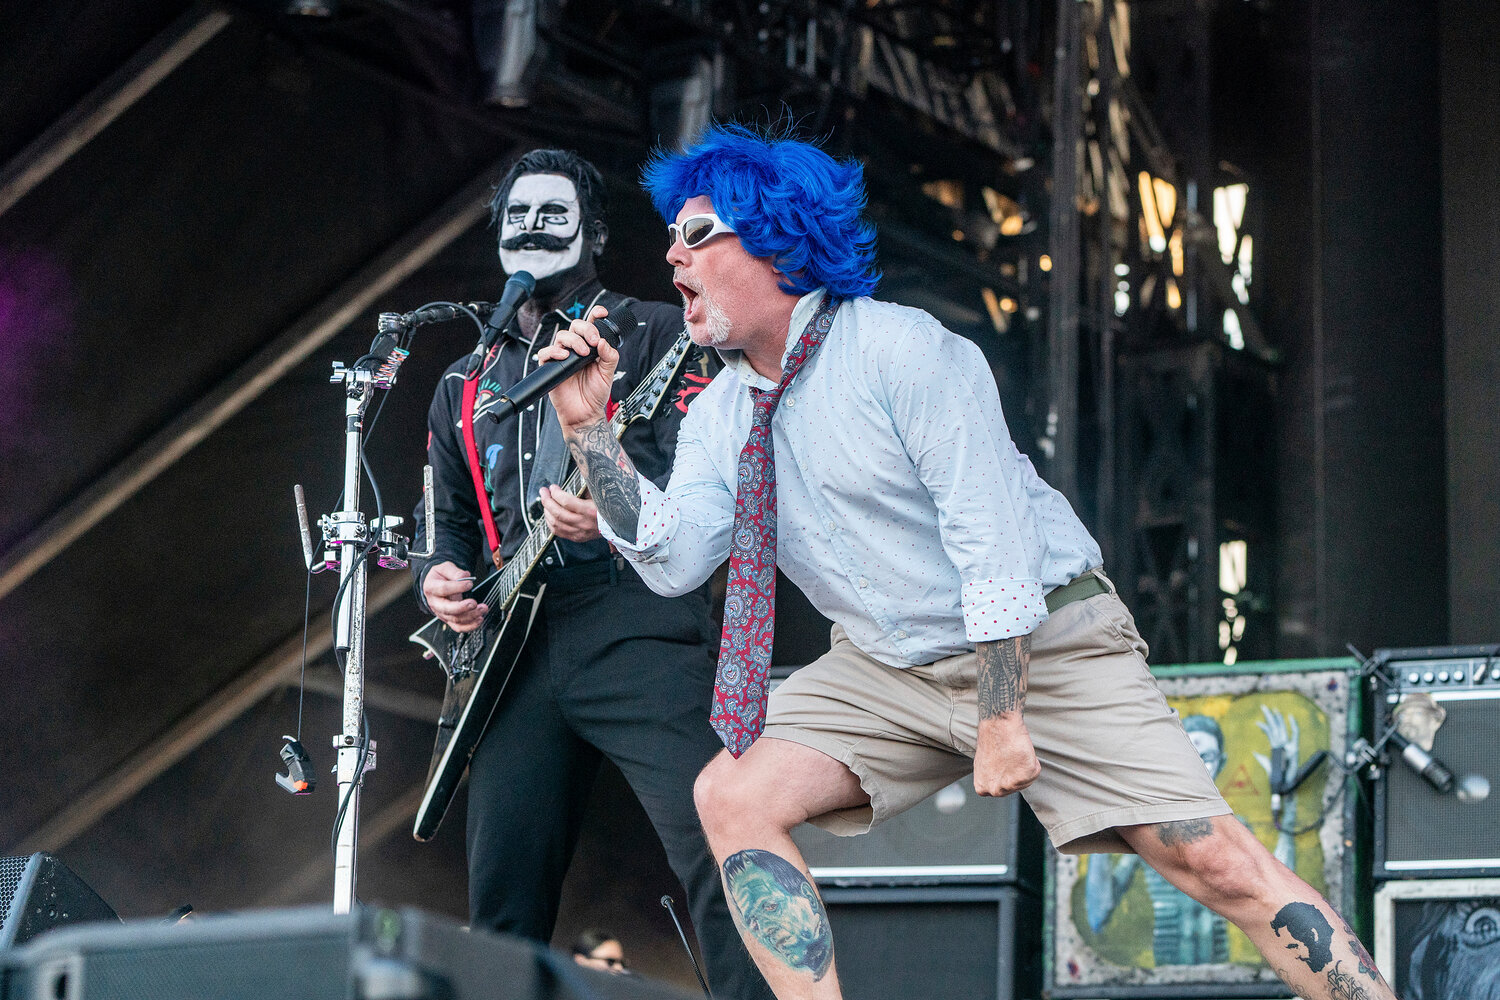 Wes Borland, left, and Fred Durst of Limp Bizkit perform during Louder Than Life Music Festival on Sept. 22, 2023, at Highland Festival Grounds in Louisville, Kentucky.